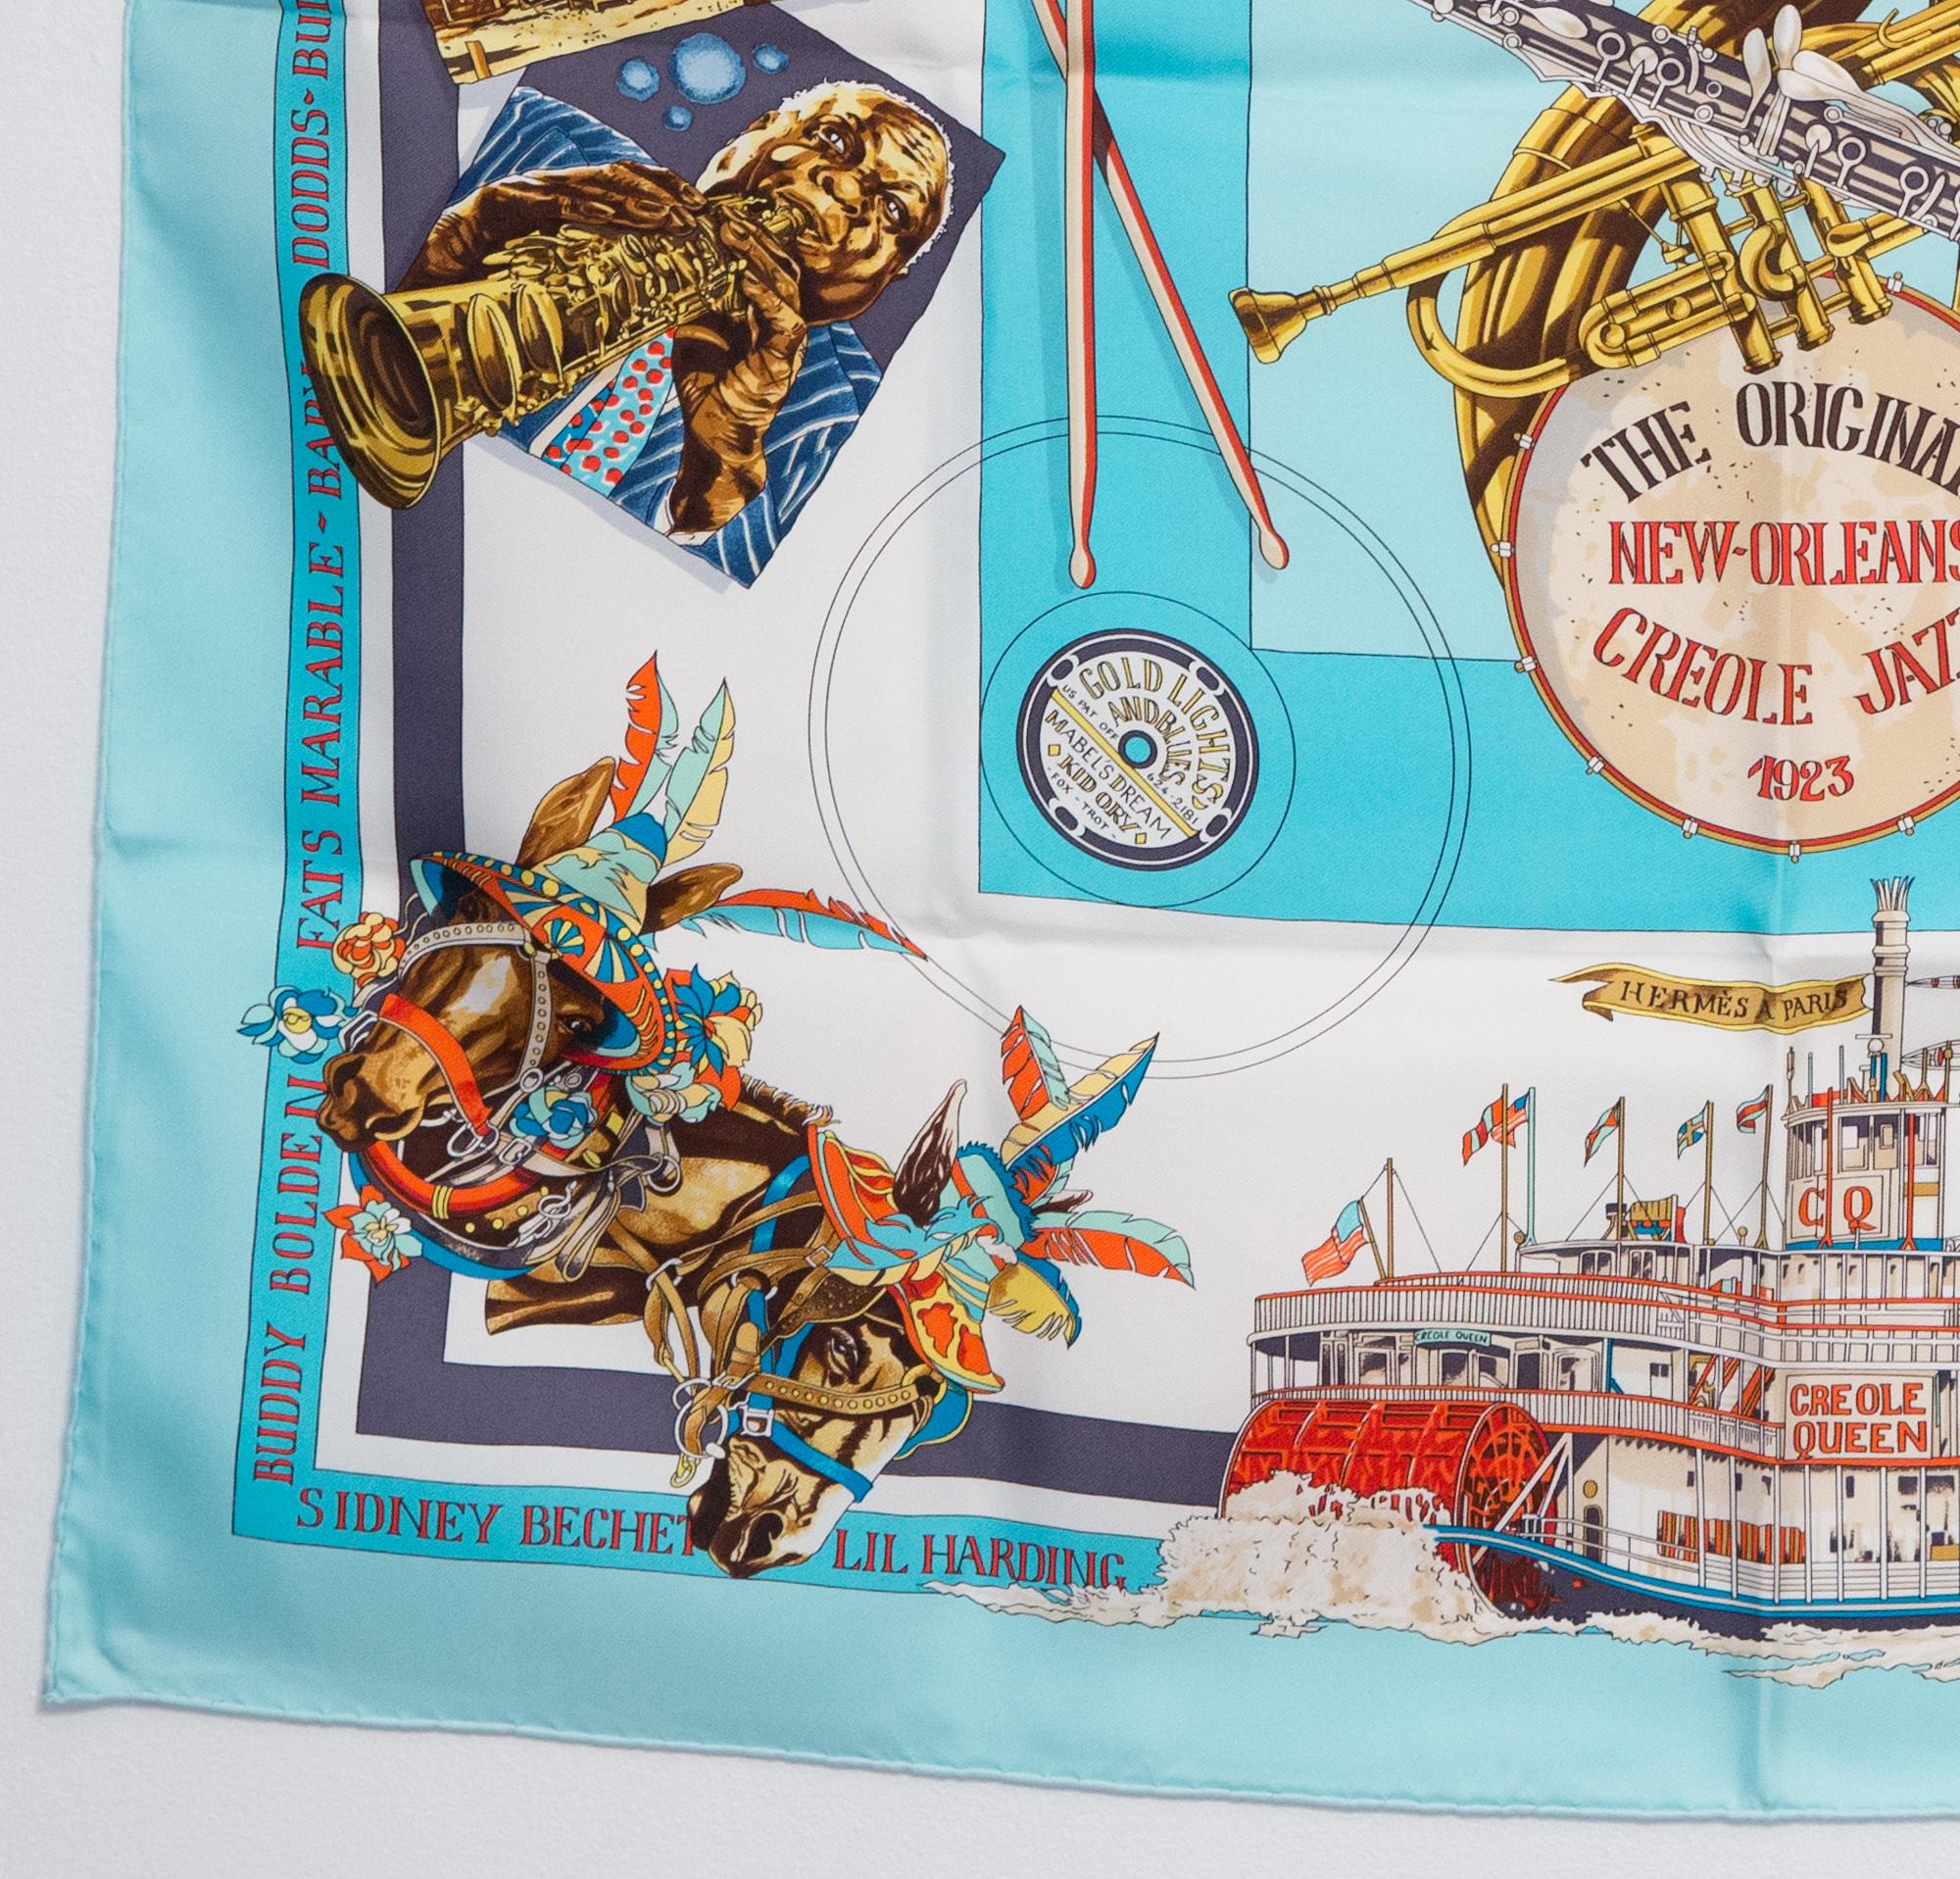 Gray Hermes New Orleans Creole Jazz 1923 by Loic Dubigeon Silk Scarf